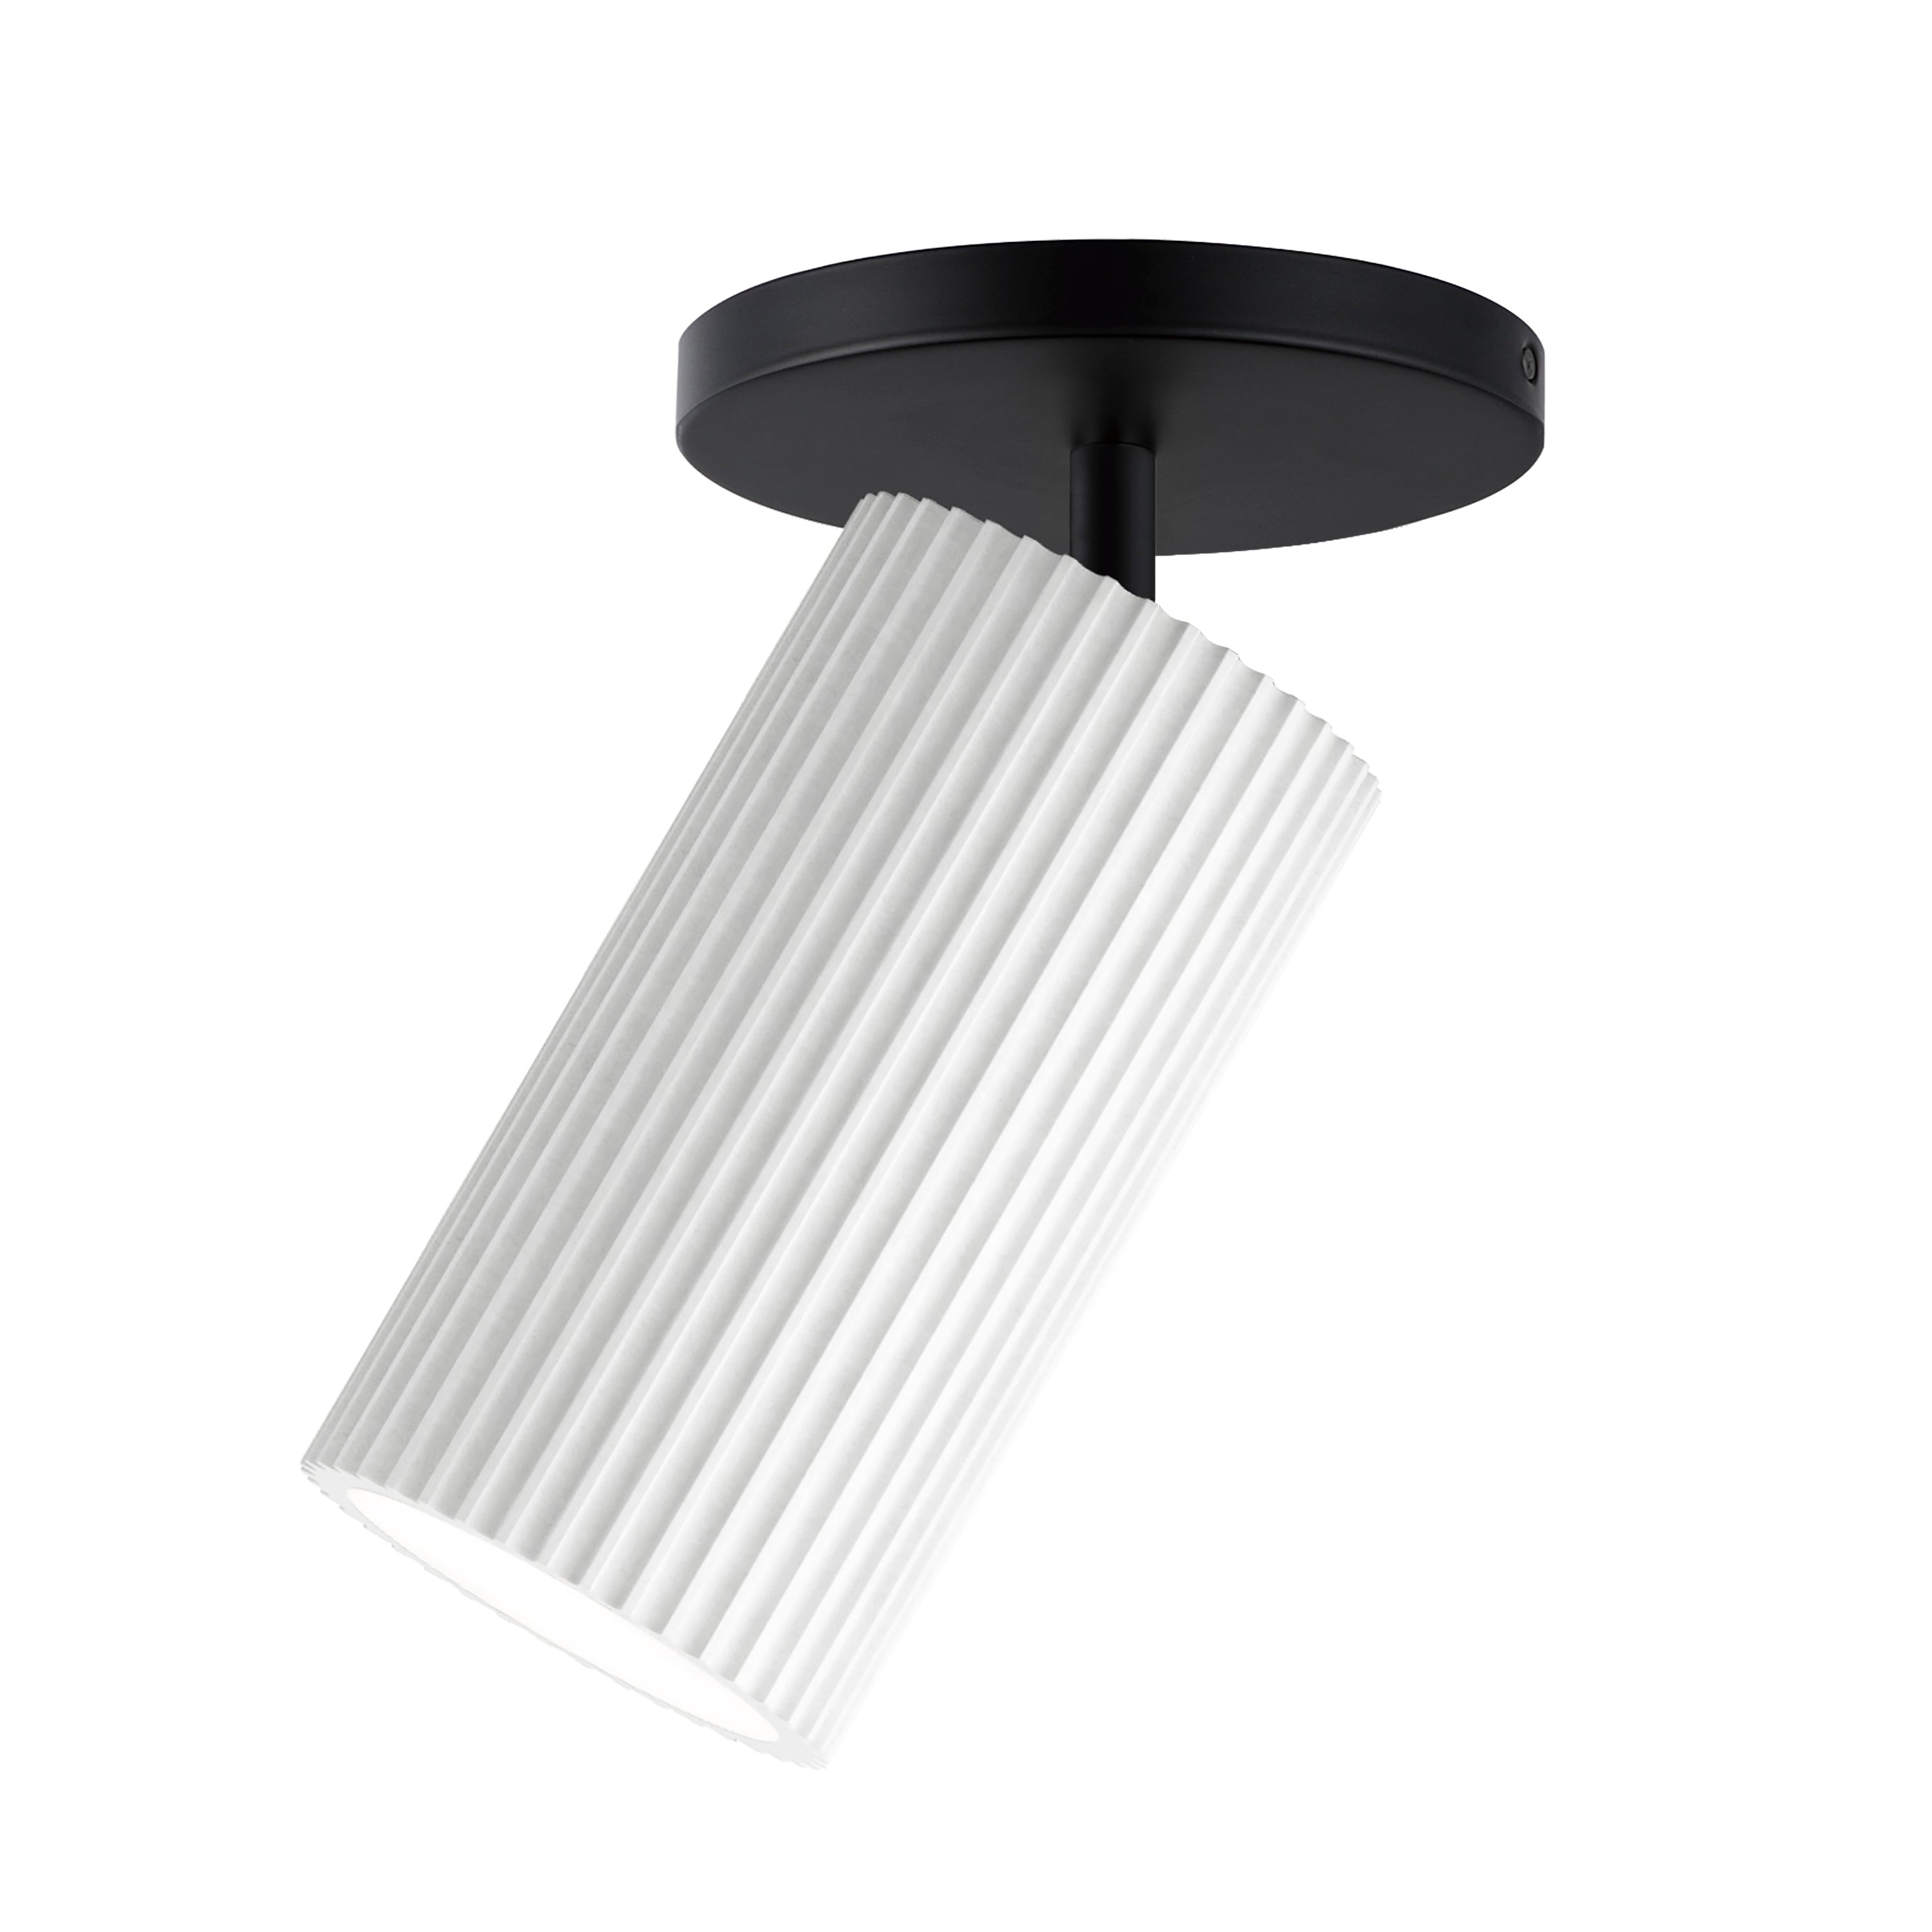 Pleat-Wall Sconce Wall Light Fixtures ET2 3.25x3.25x6 White / Black 